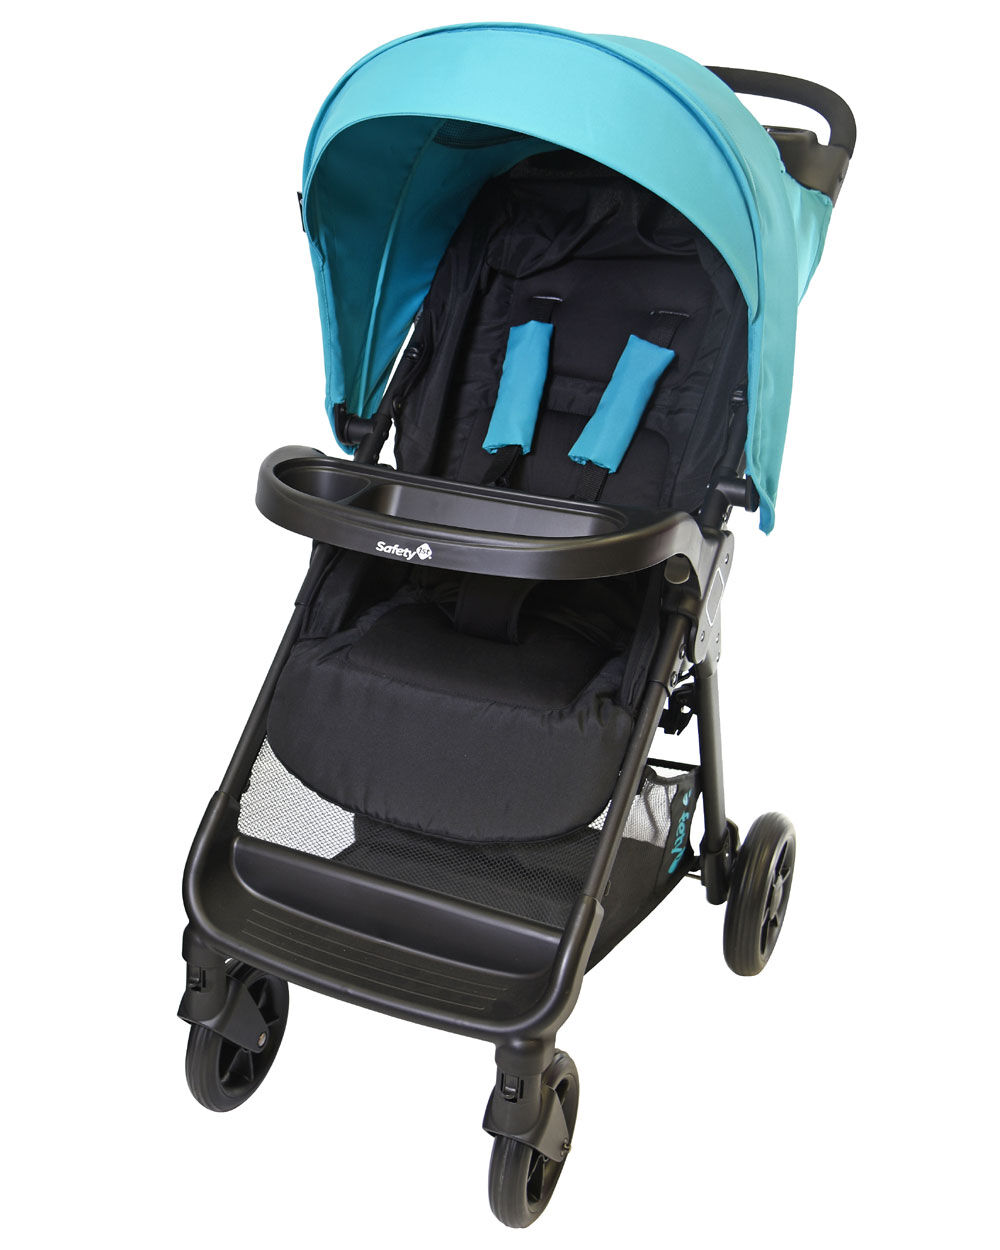 safety 1st smooth ride travel system lake blue